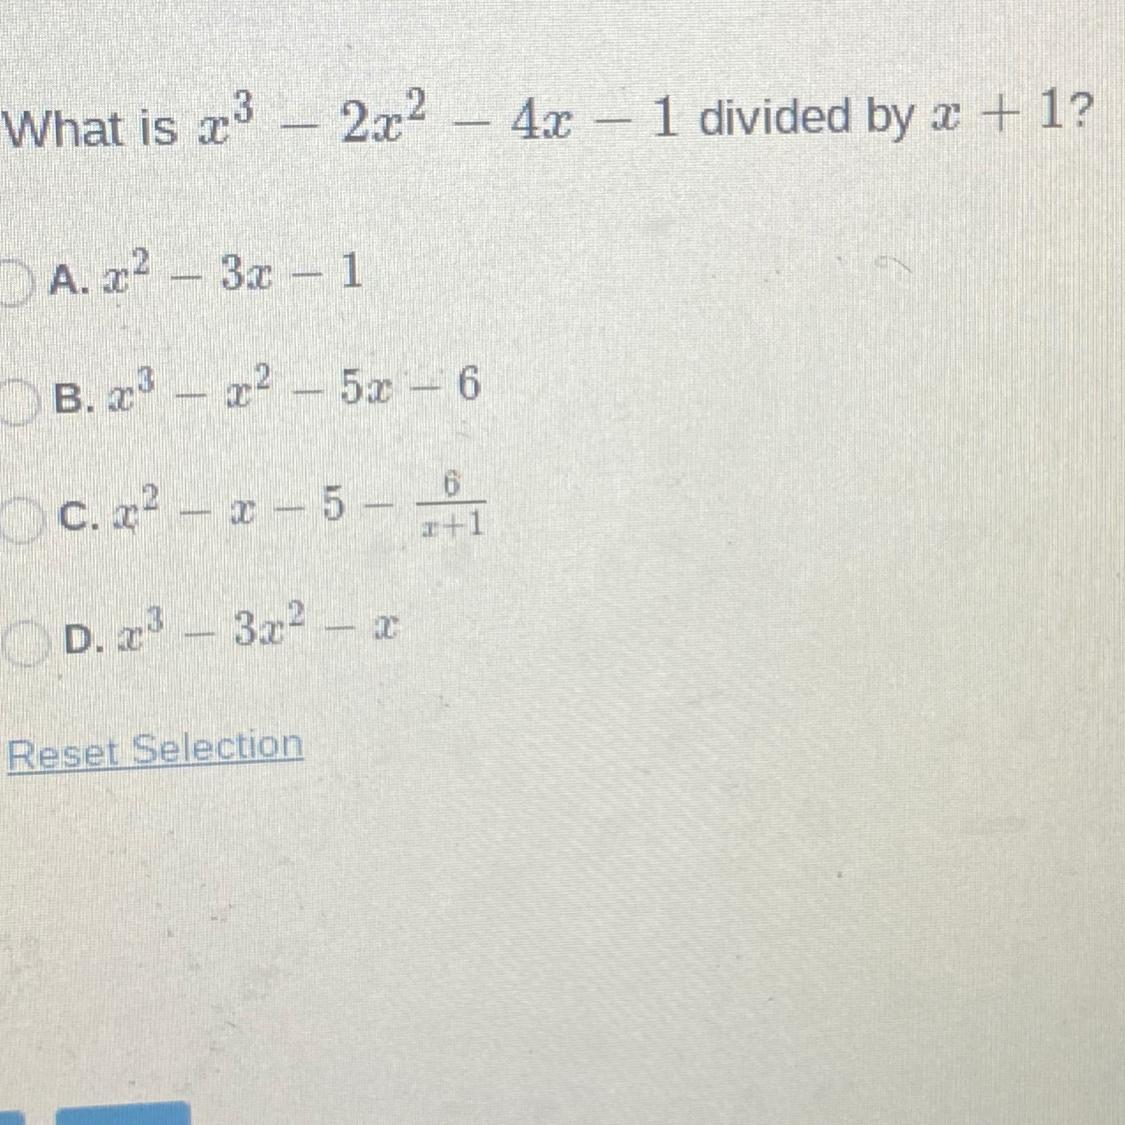 What Is X^3 - 2x^2 - 4x - 1 Divided By X + 1 ? 